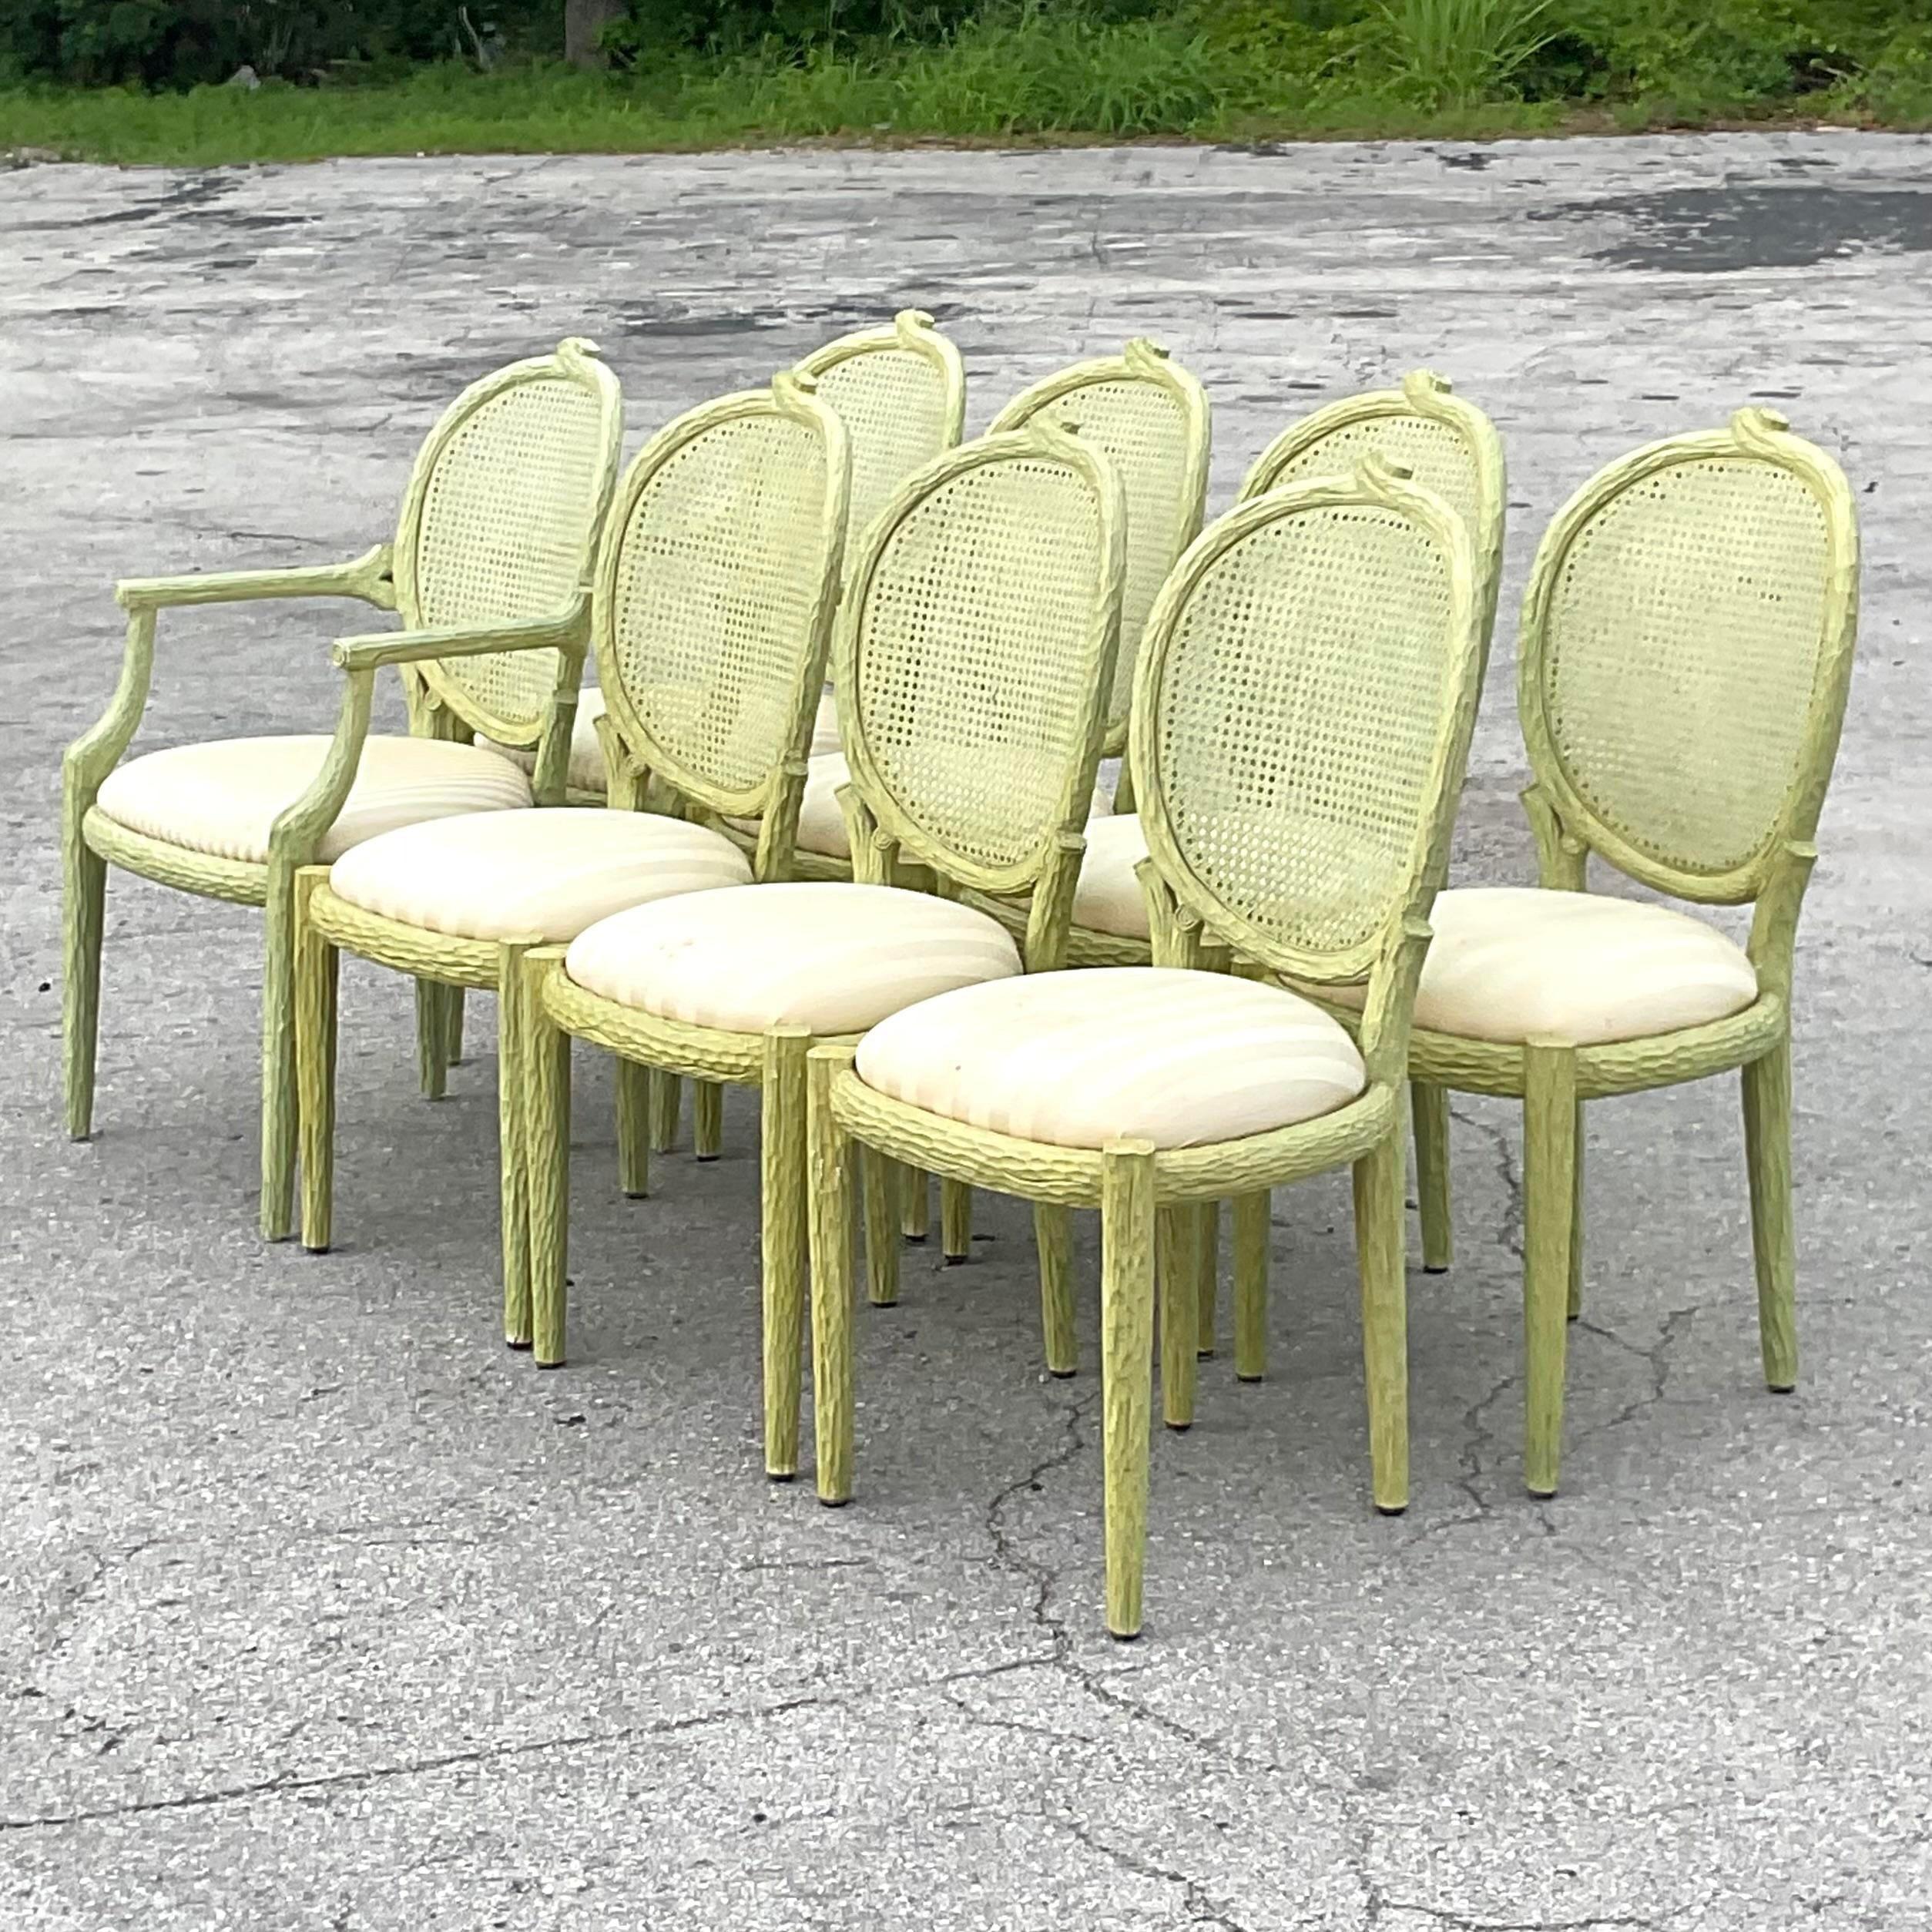 20th Century Vintage Regency Faux Bois and Cane Dining Chairs - Set of 8